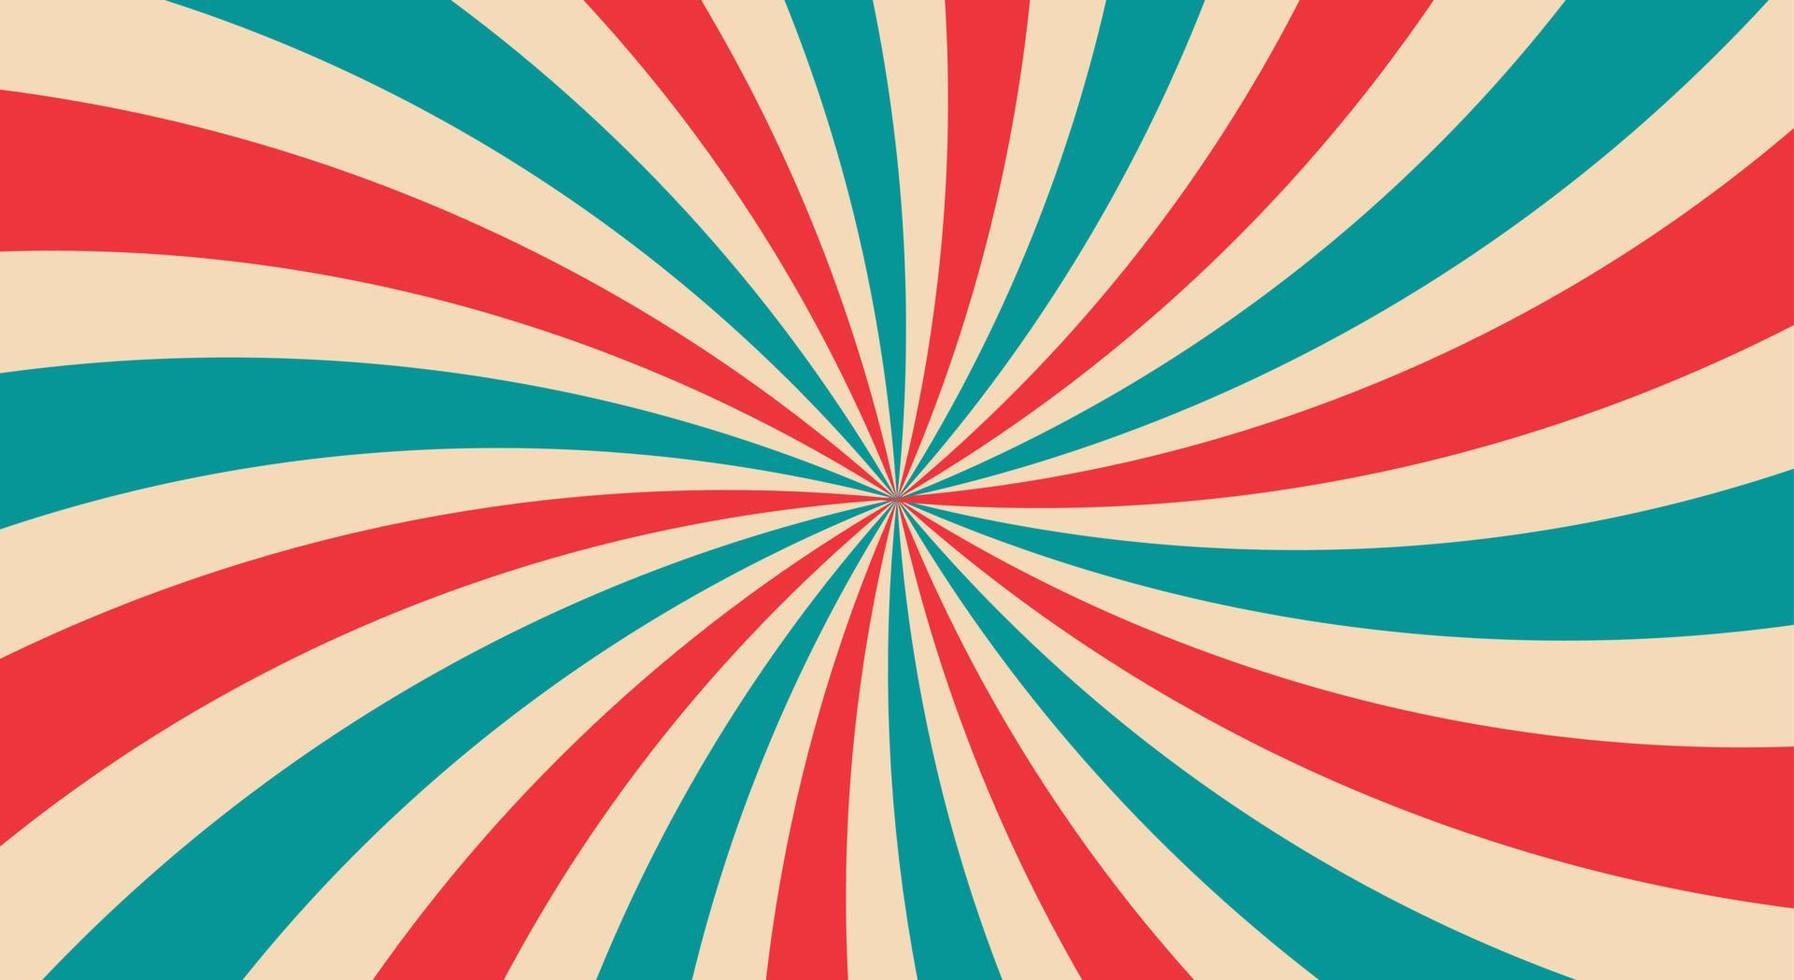 Retro background with curved. Sunburst or sun burst retro background. Turquoise and red colors. vector